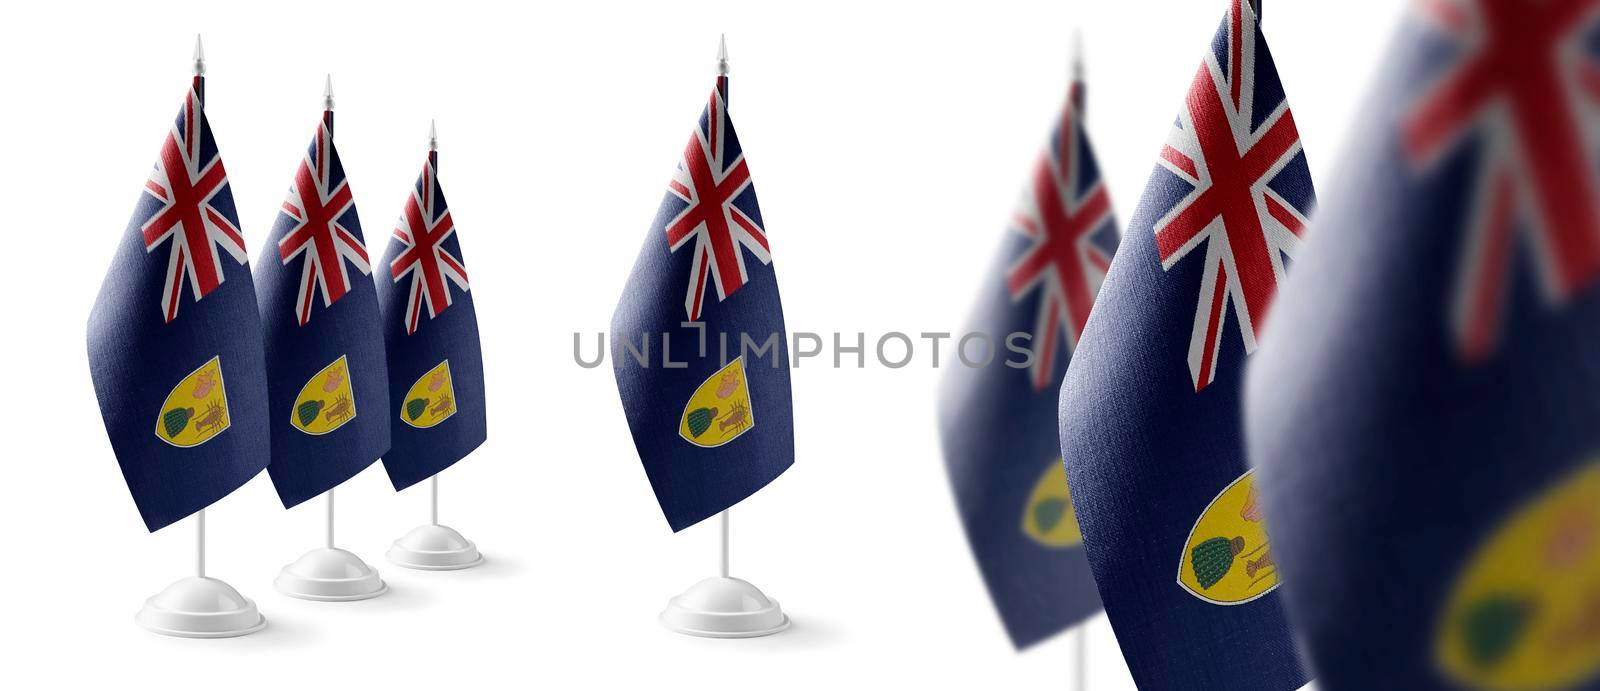 Set of Turks and Caicos Islands national flags on a white background.